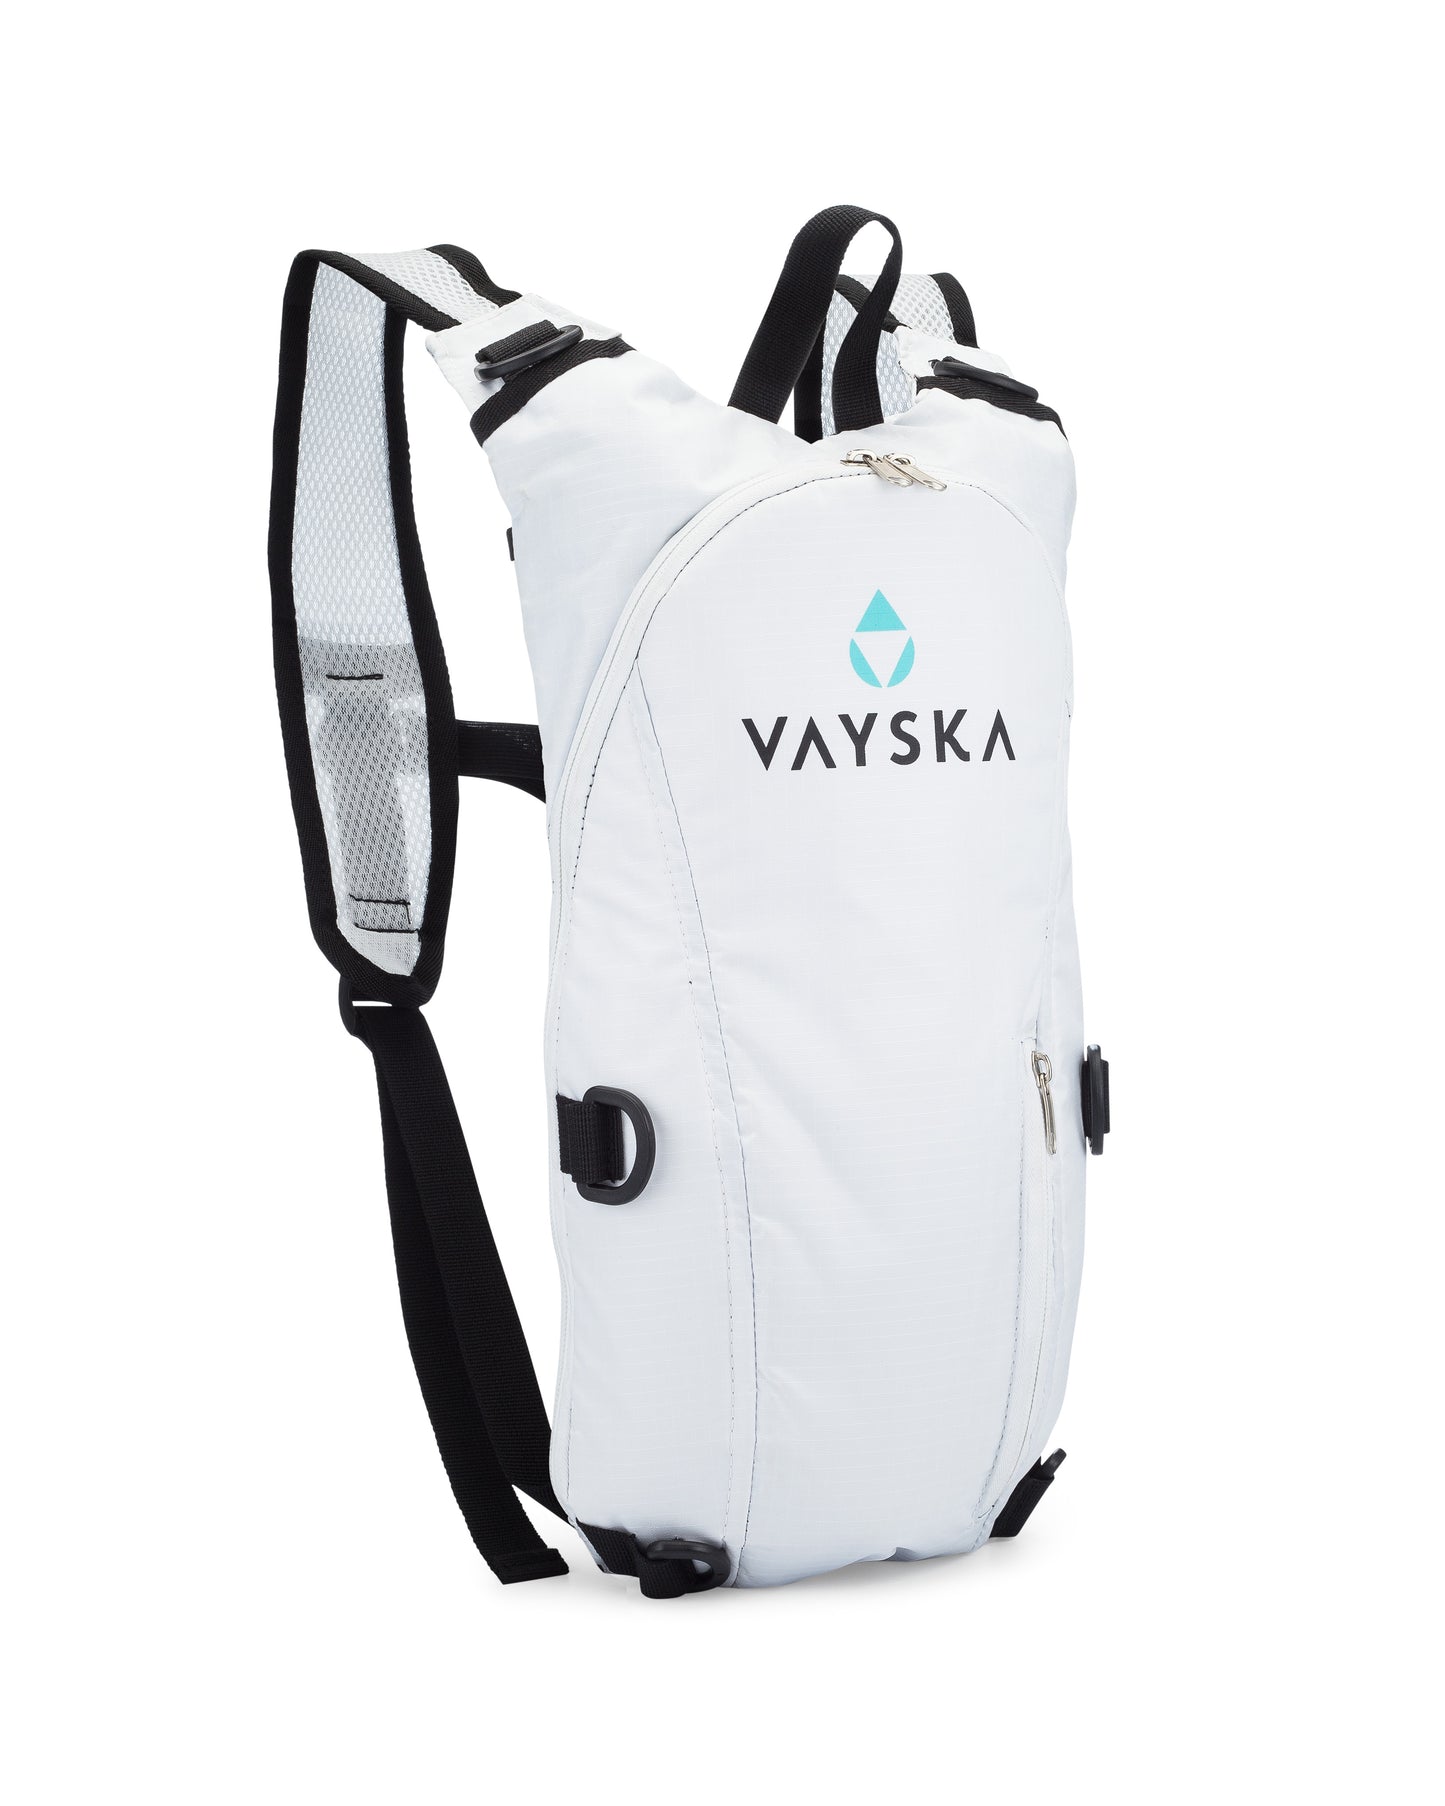 Another boring background of white, with a white bag with comfort straps from Vayska. Yes white on white, it works and its still an awesome pack.